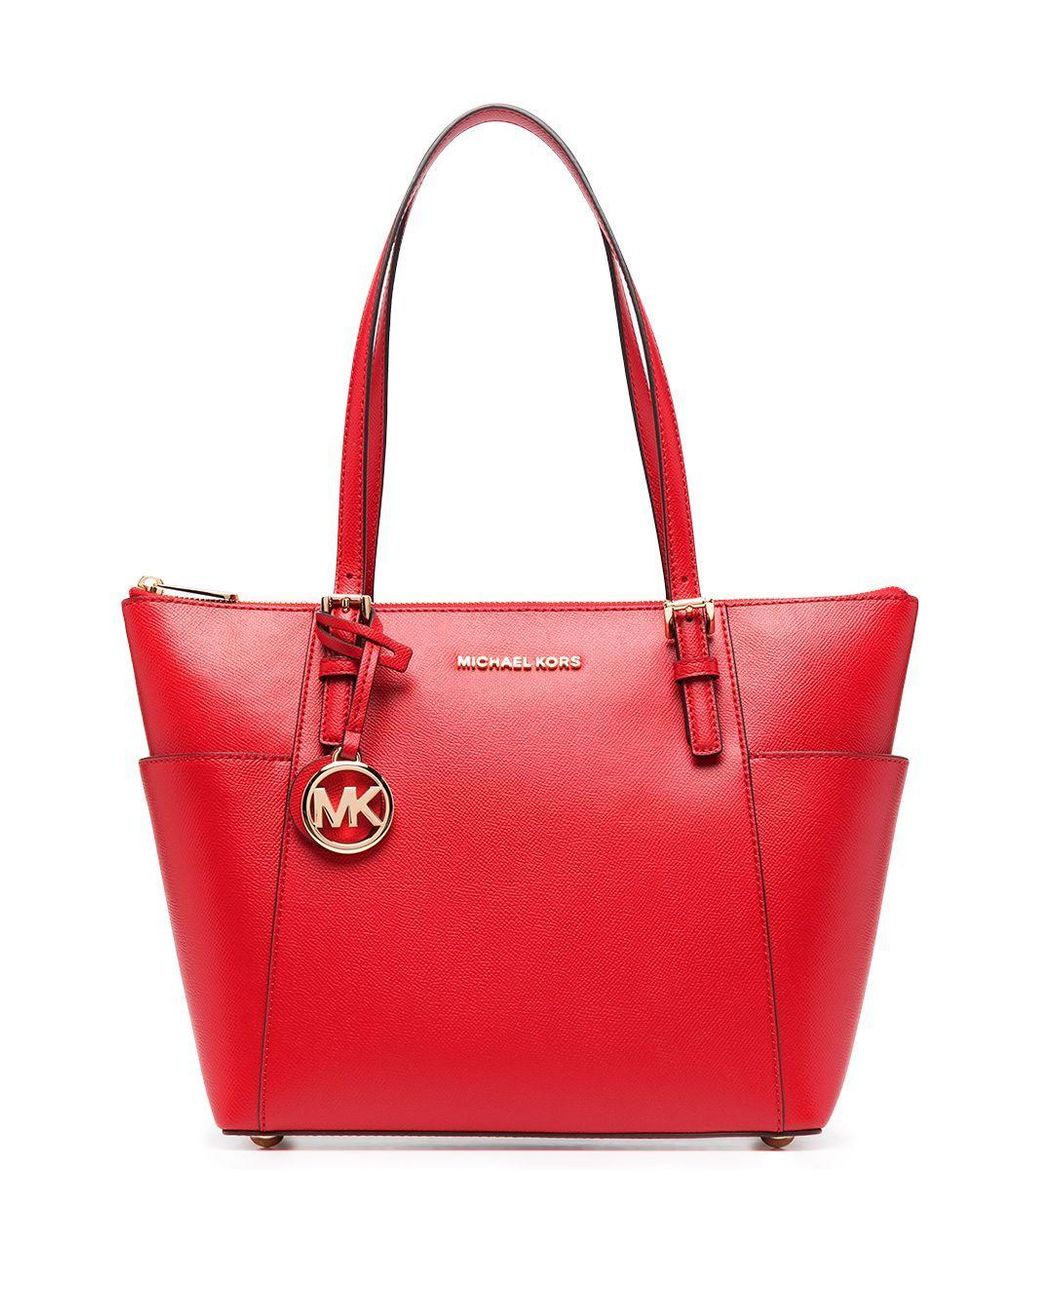 Michael Kors Leather Tote in Red - Lyst